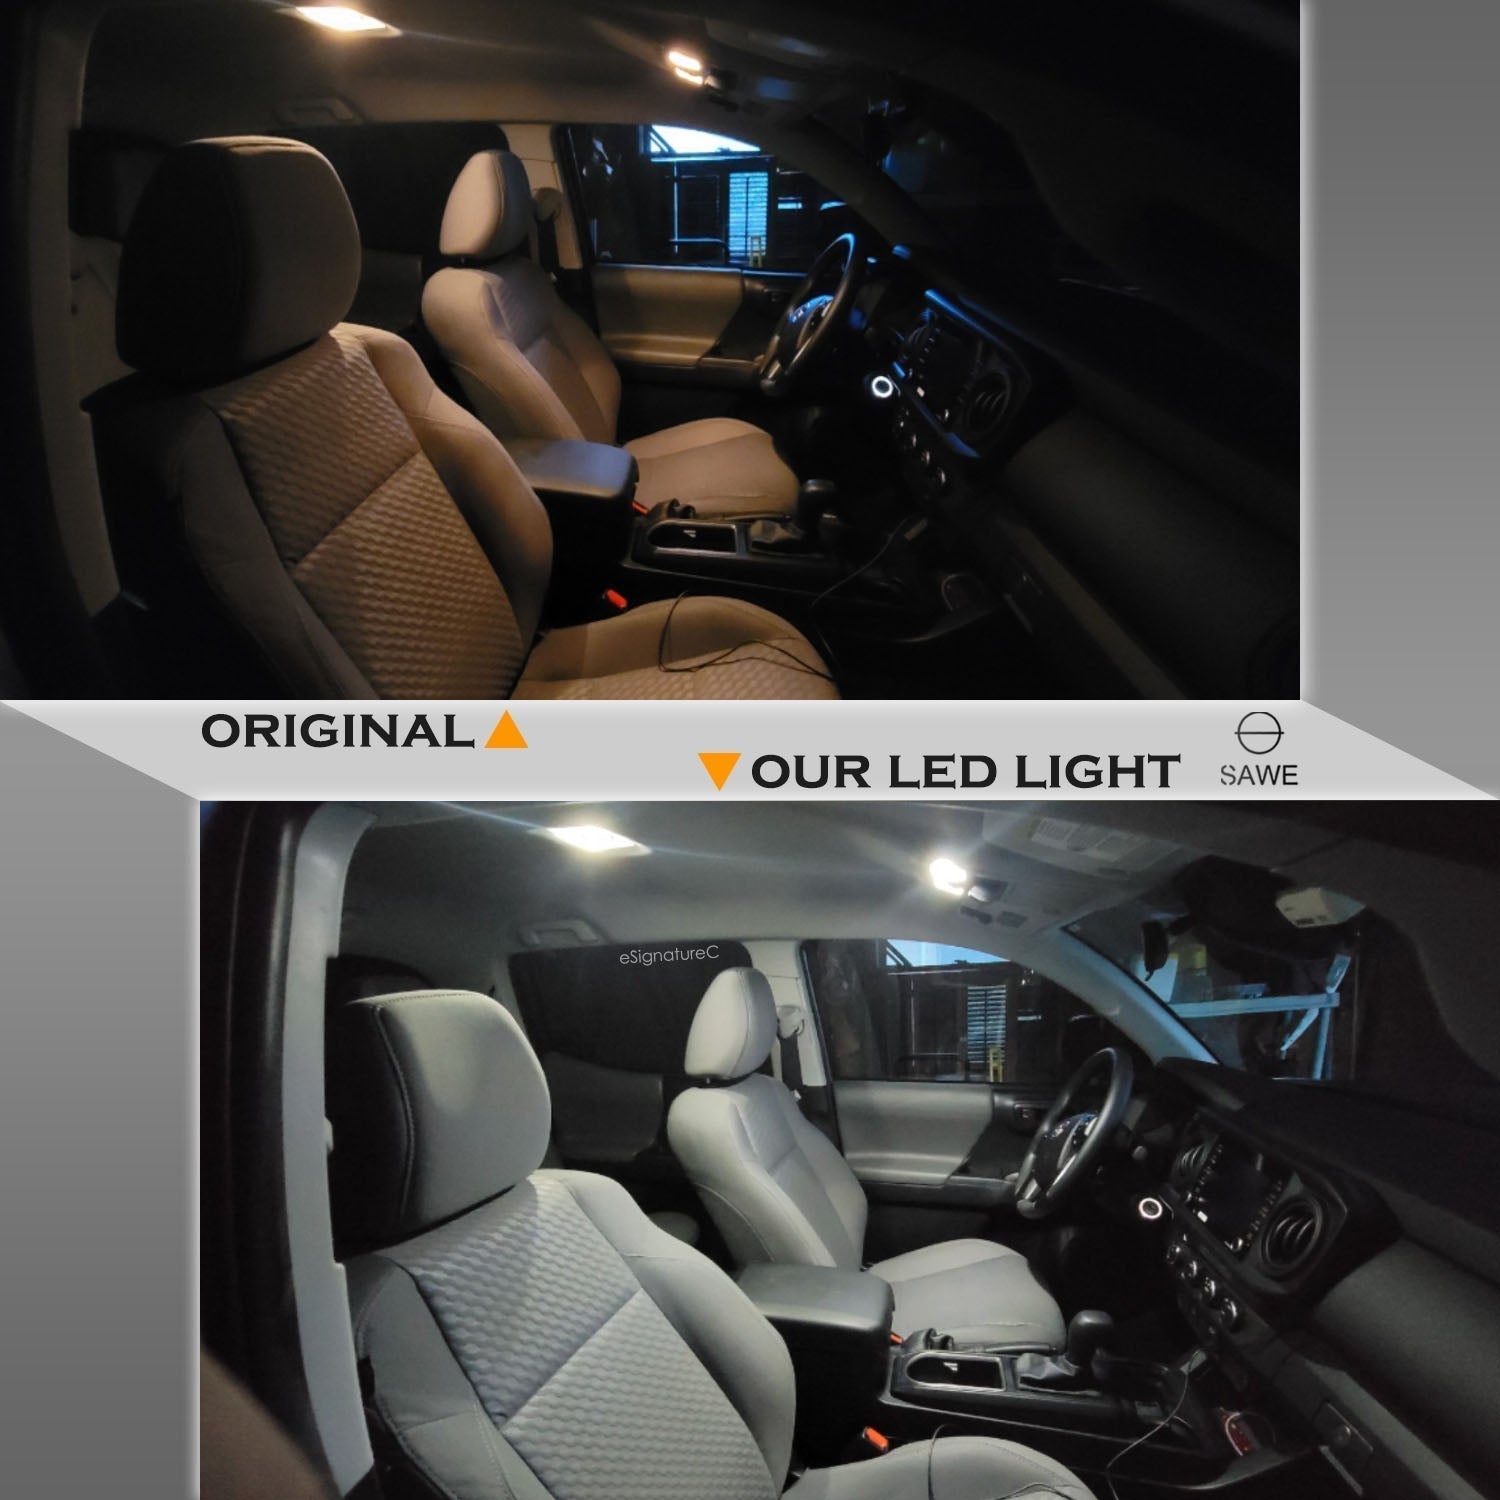 For Audi A8 S8 Interior LED Lights - Dome & Map Light Bulb Package Kit for 2003 - 2009 - White